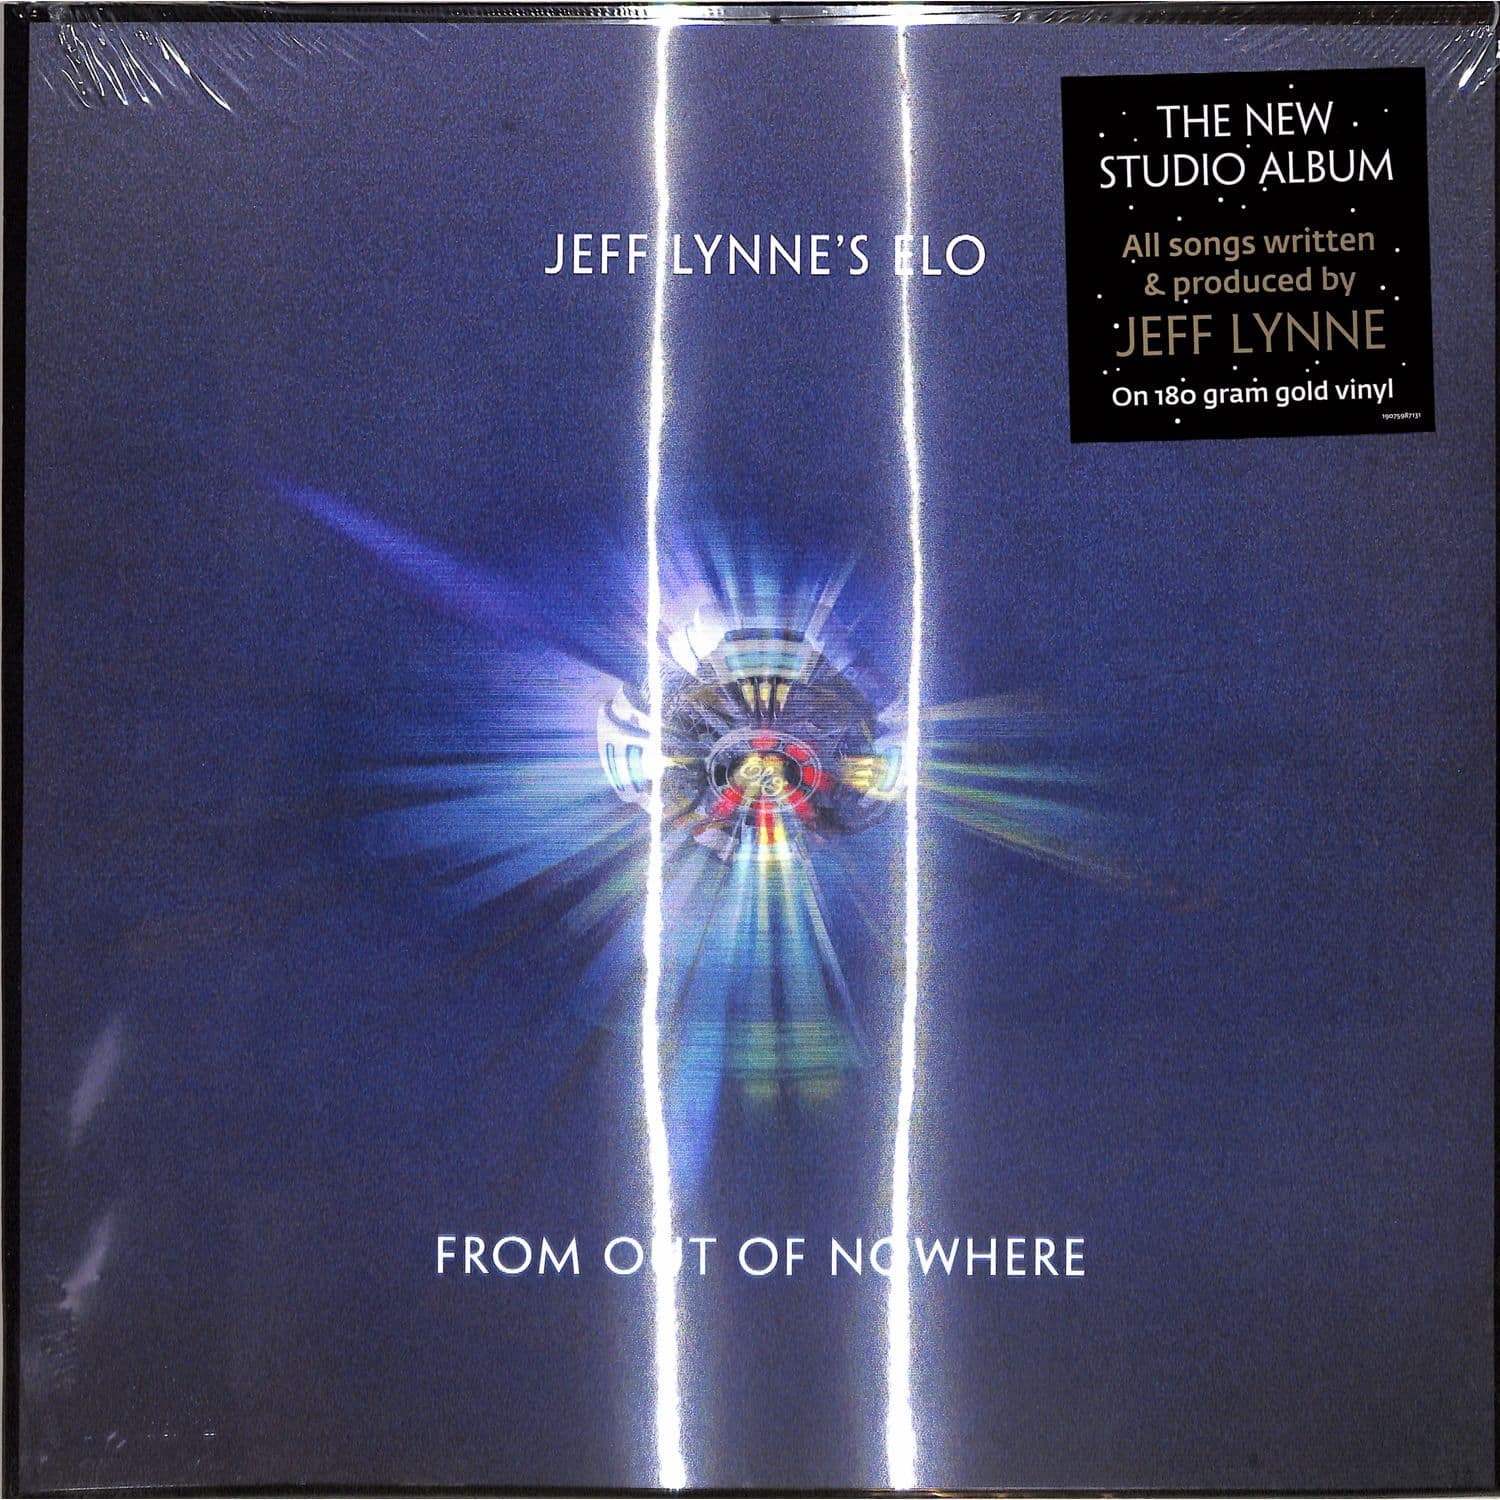 Jeff Lynne s ELO - FROM OUT OF NOWHERE 